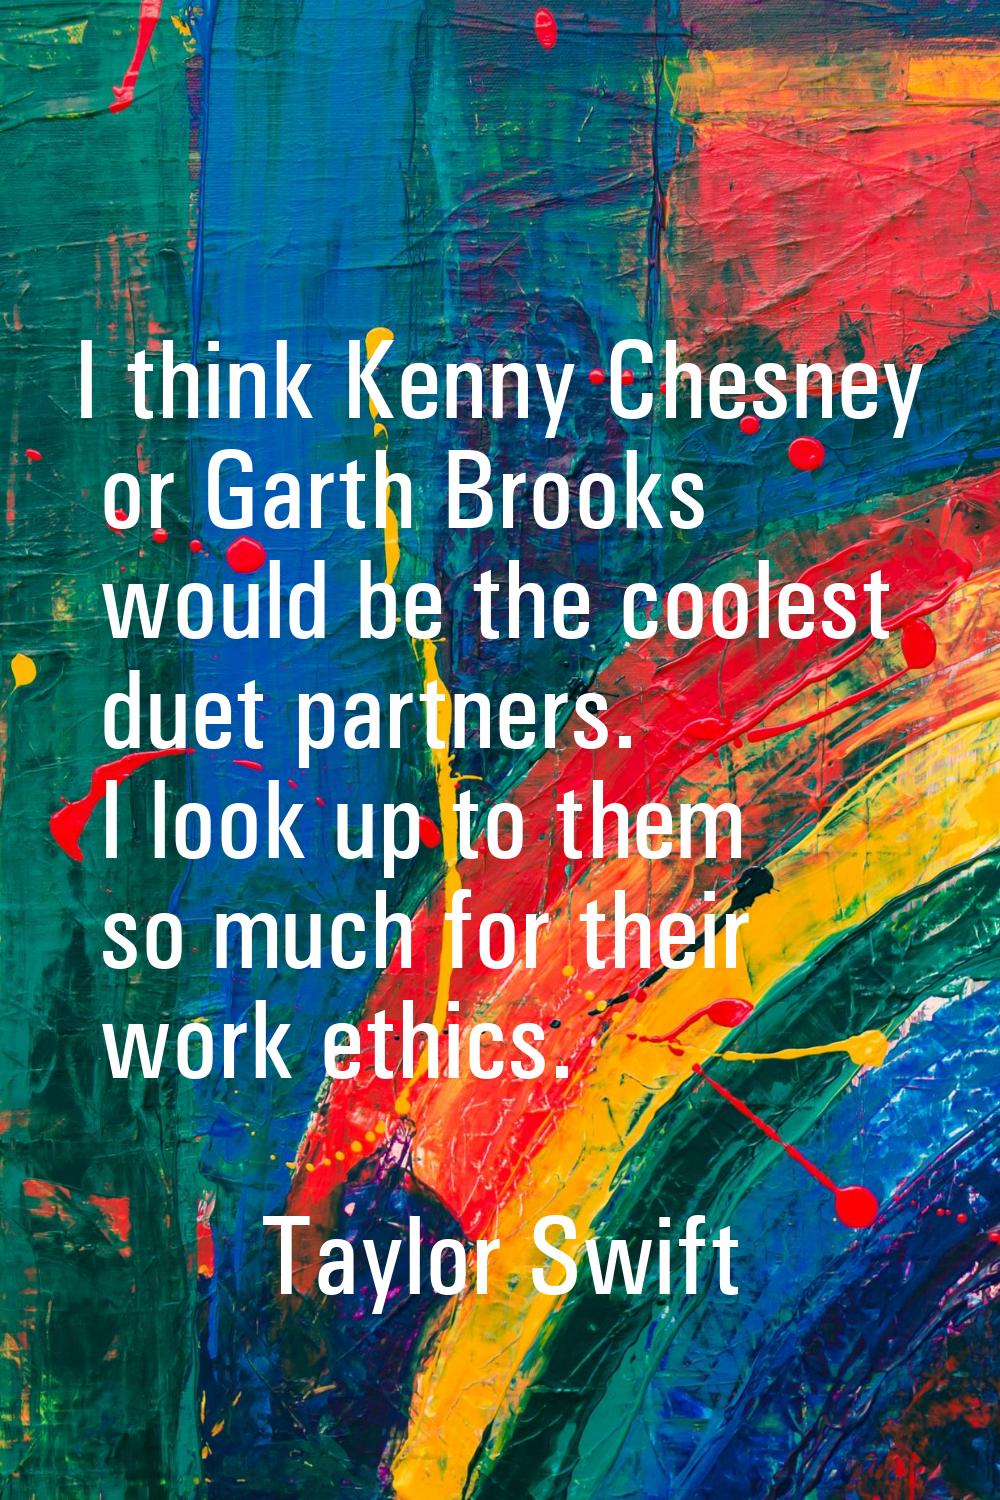 I think Kenny Chesney or Garth Brooks would be the coolest duet partners. I look up to them so much